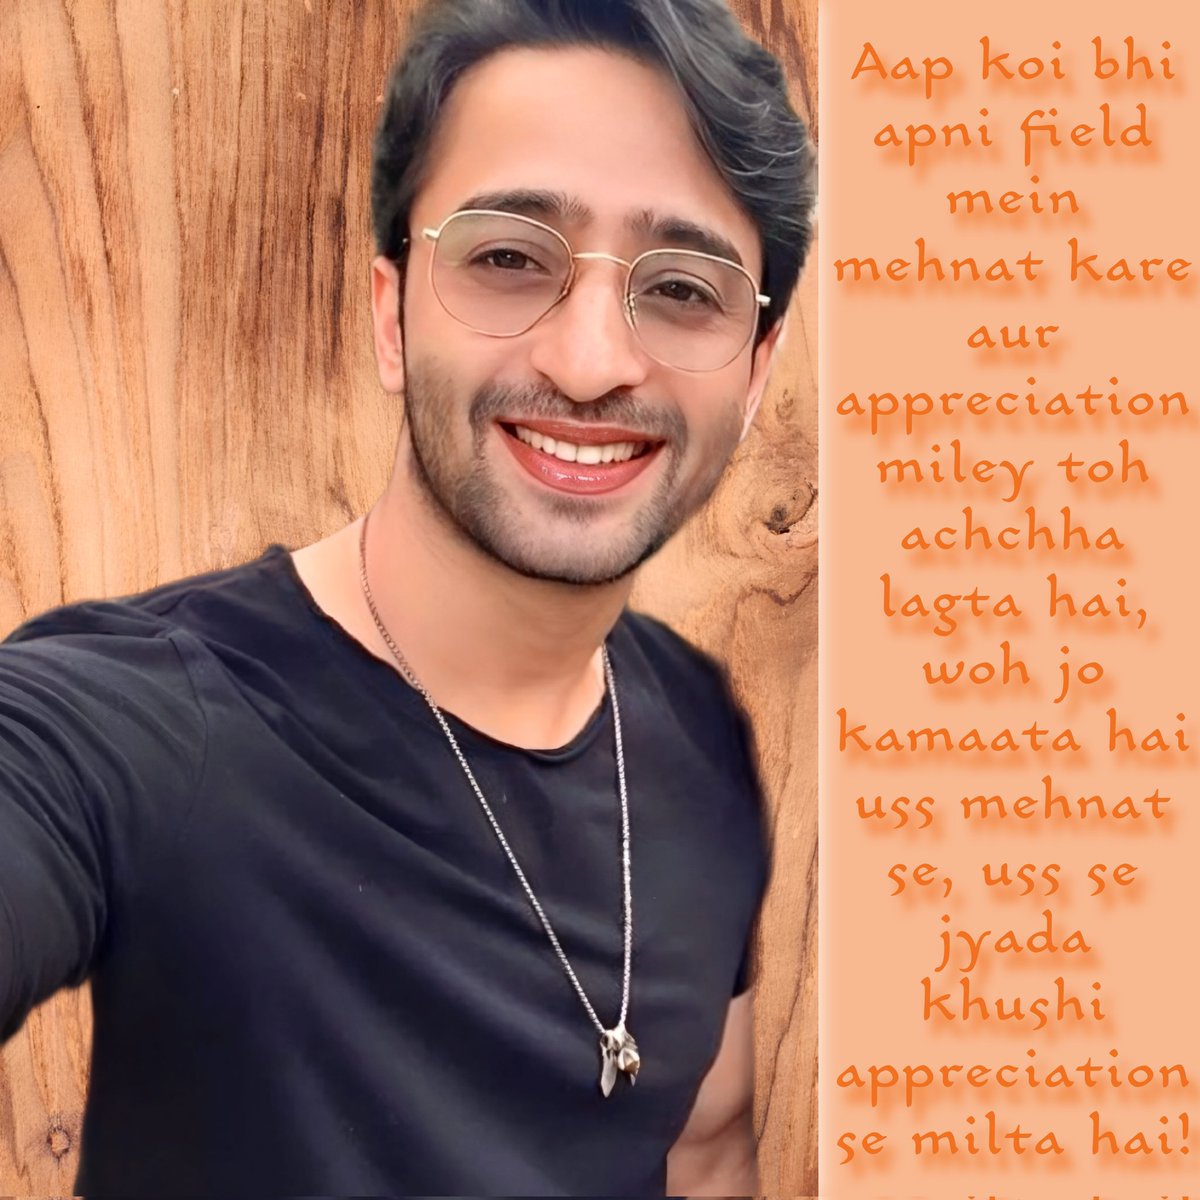 If You Work Hard In Any Field, It Feels Good When You Get Appreciated. That Appreciation Gives You More Happiness Than The Money You Make From That Work! ~ @Shaheer_S 💫 

#SSQuotes #ShaheerSayings #StayHealthy #RiseNShine #StayBlessed #LoveAndRespect

#GodBlessYou #ShaheerSheikh